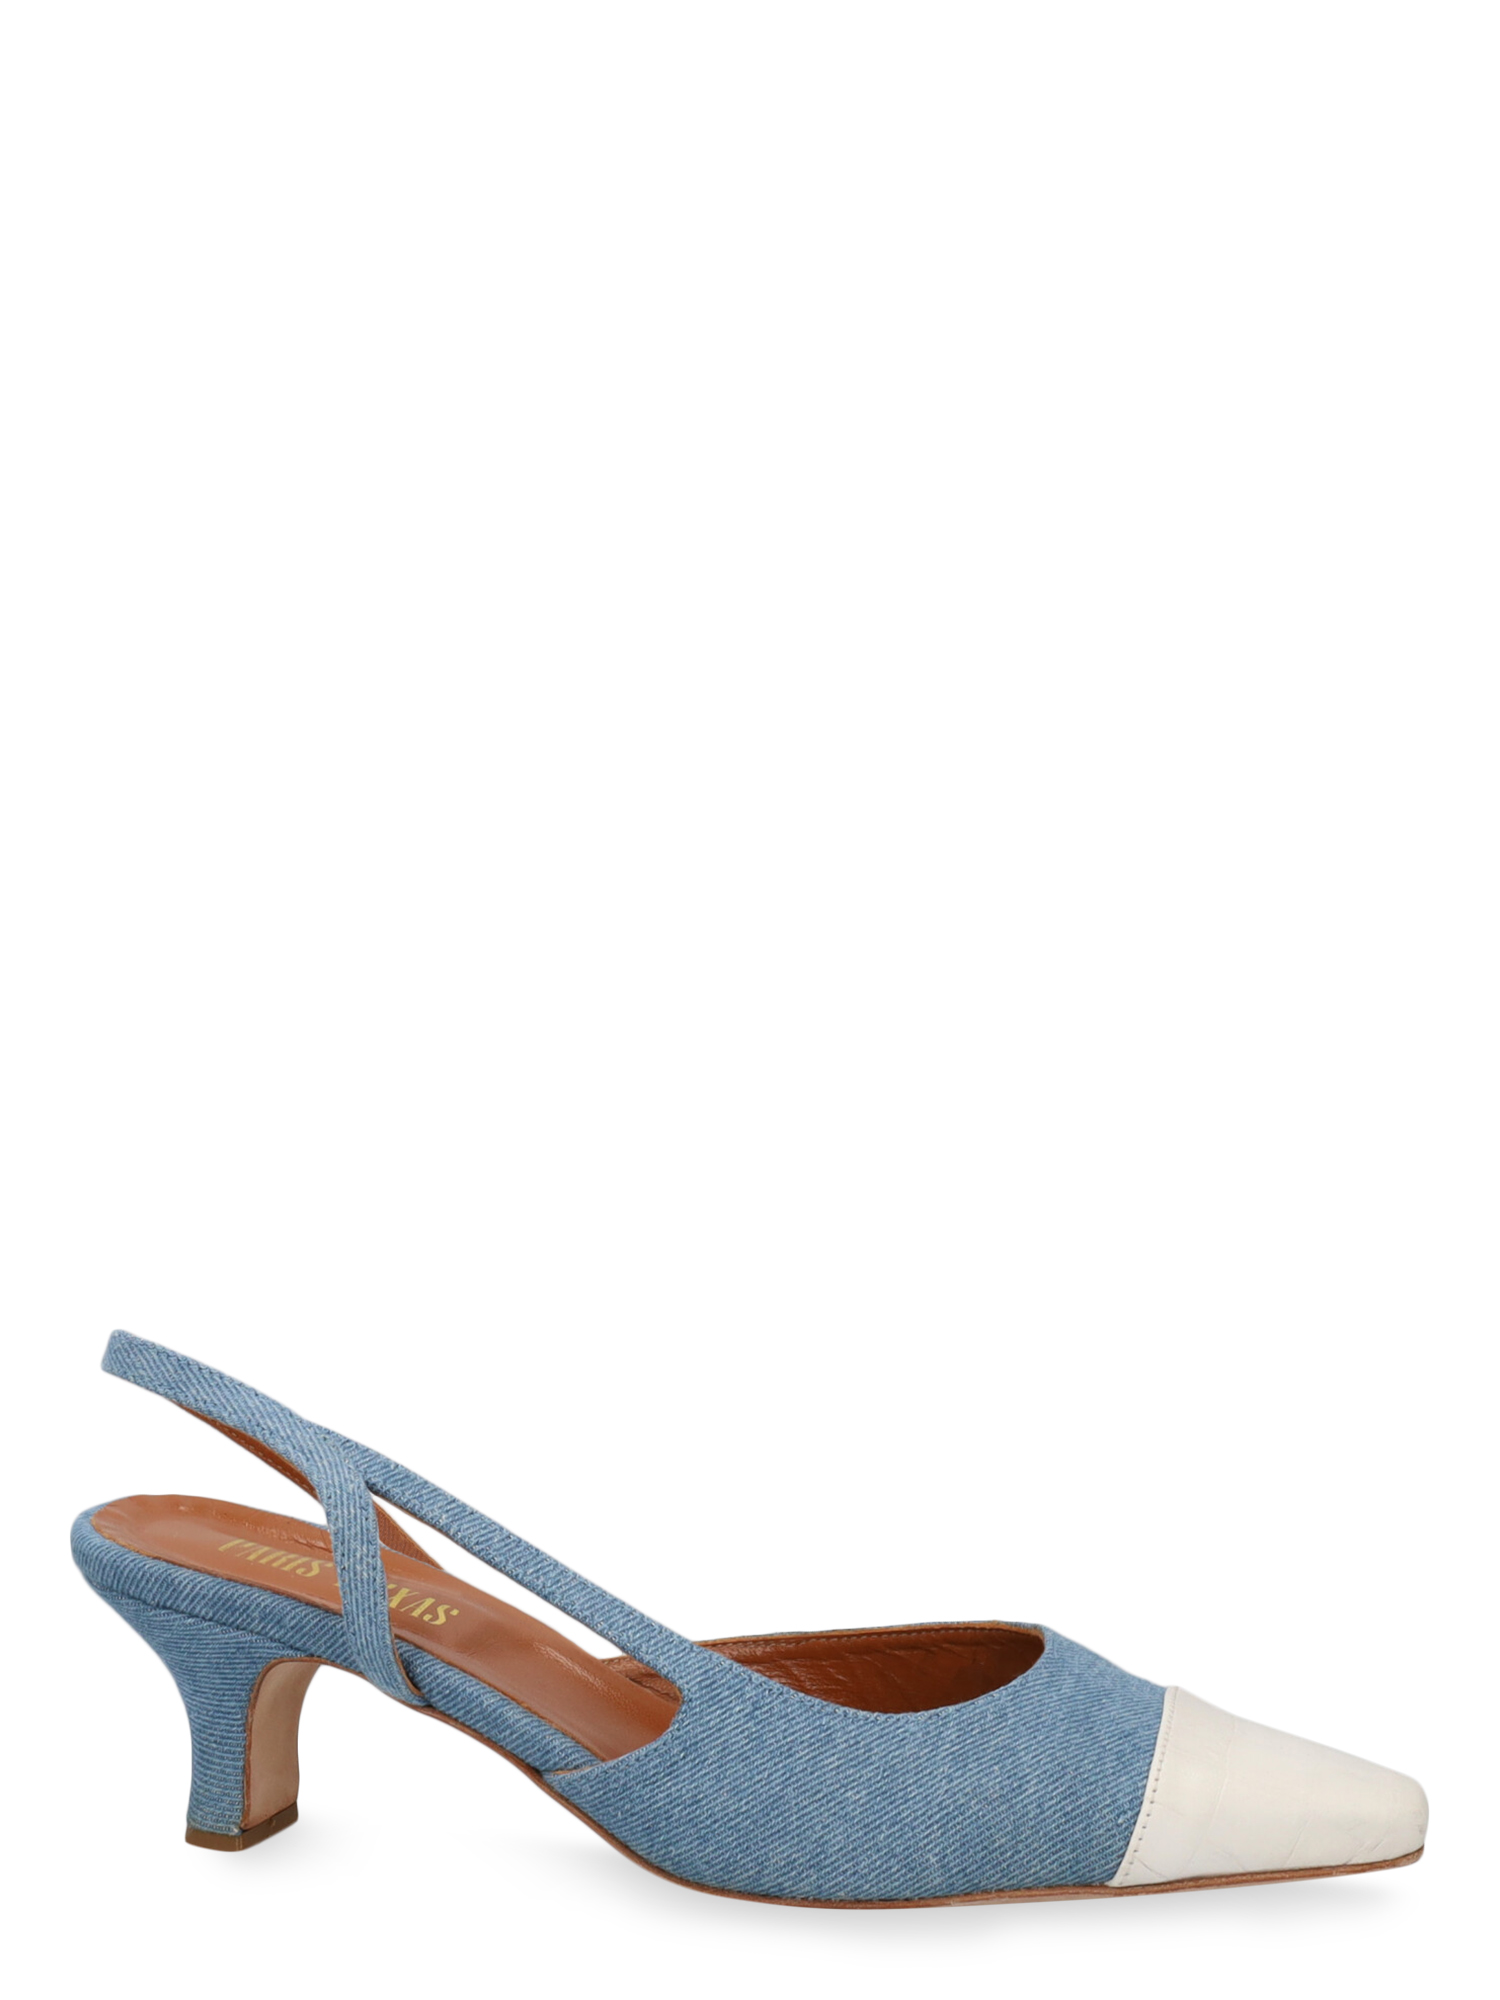 Pre-owned Paris Texas Women's Pumps -  - In Blue Fabric